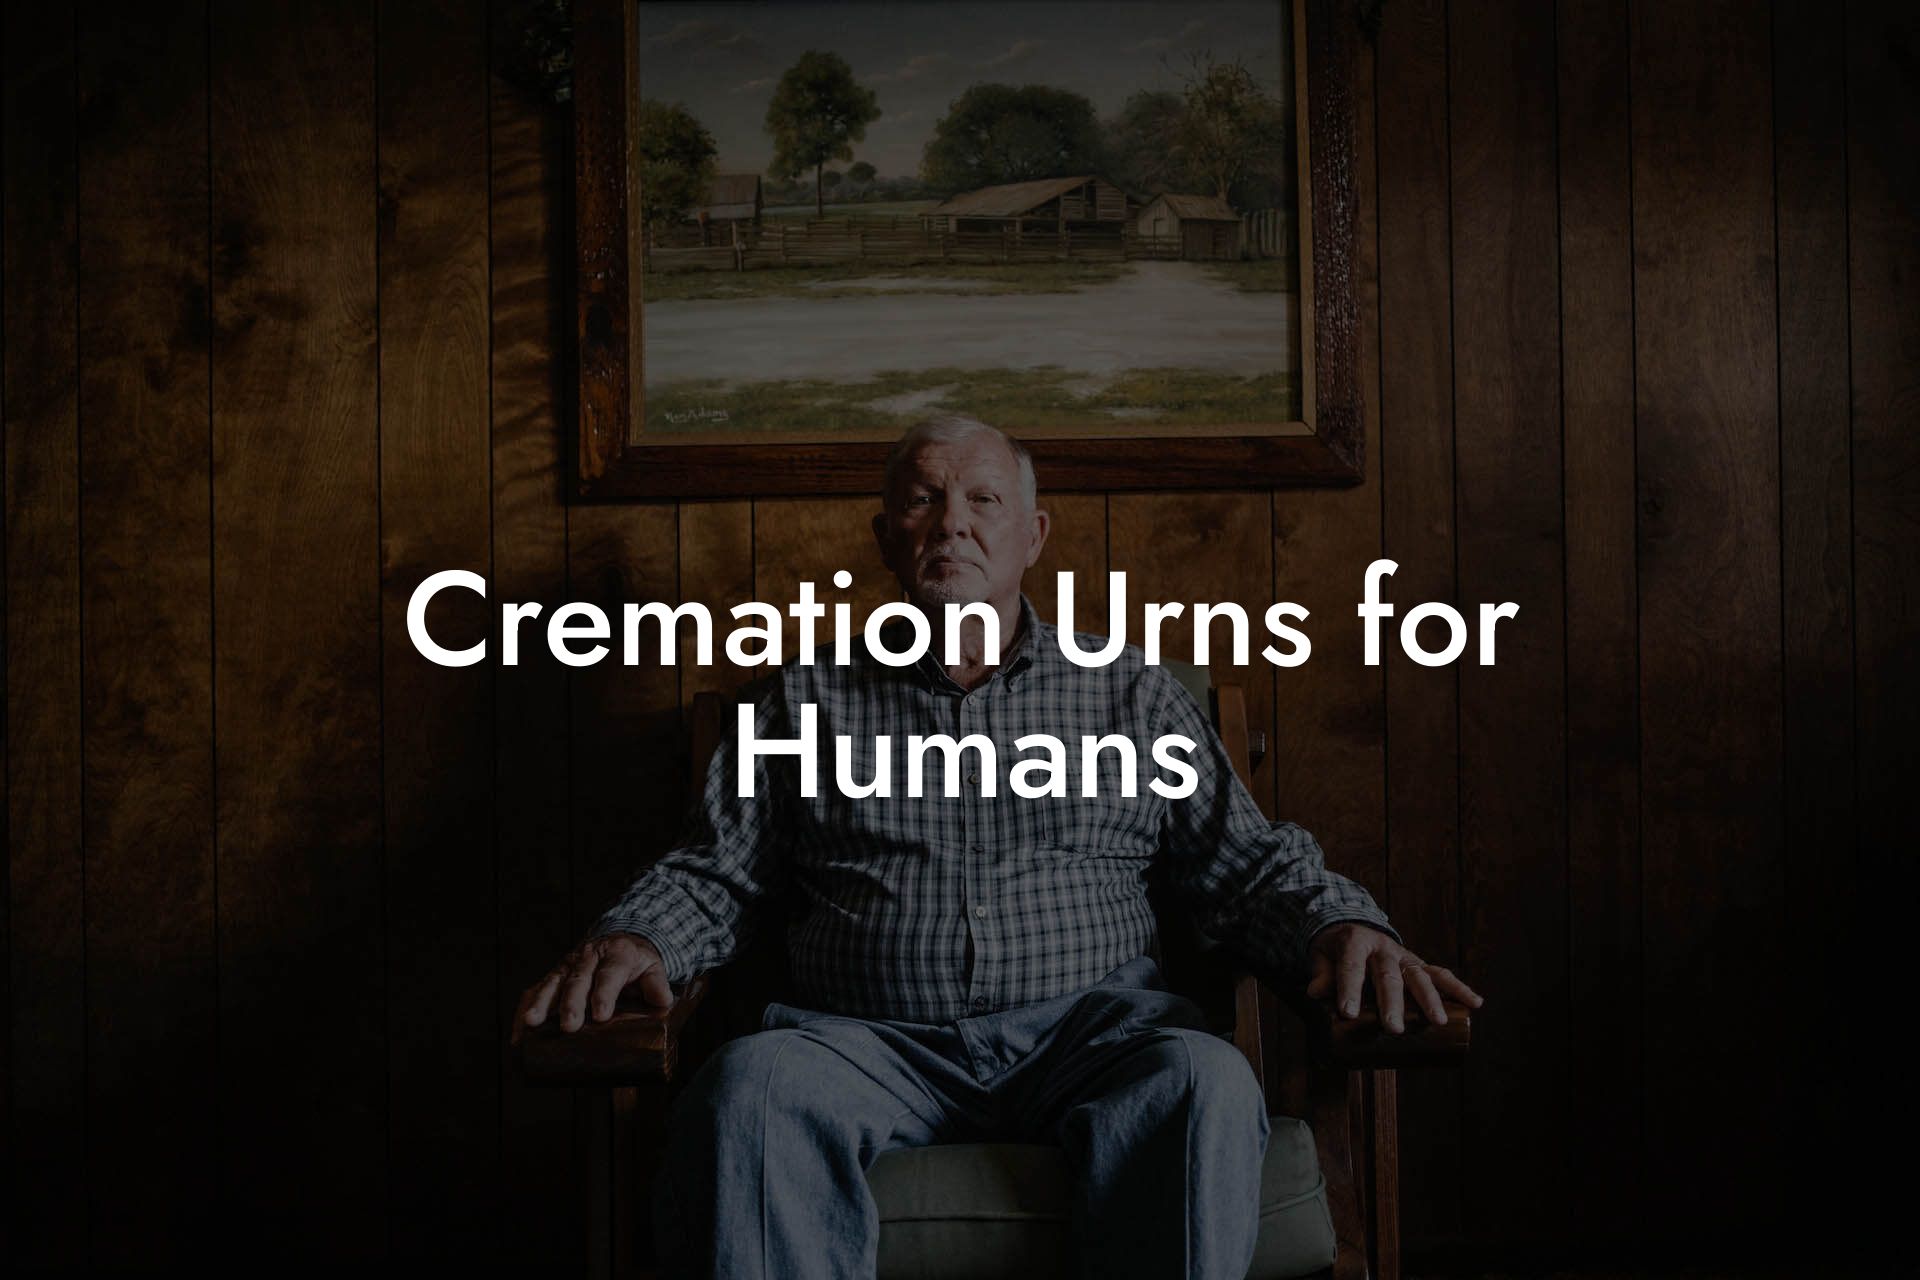 Cremation Urns for Humans